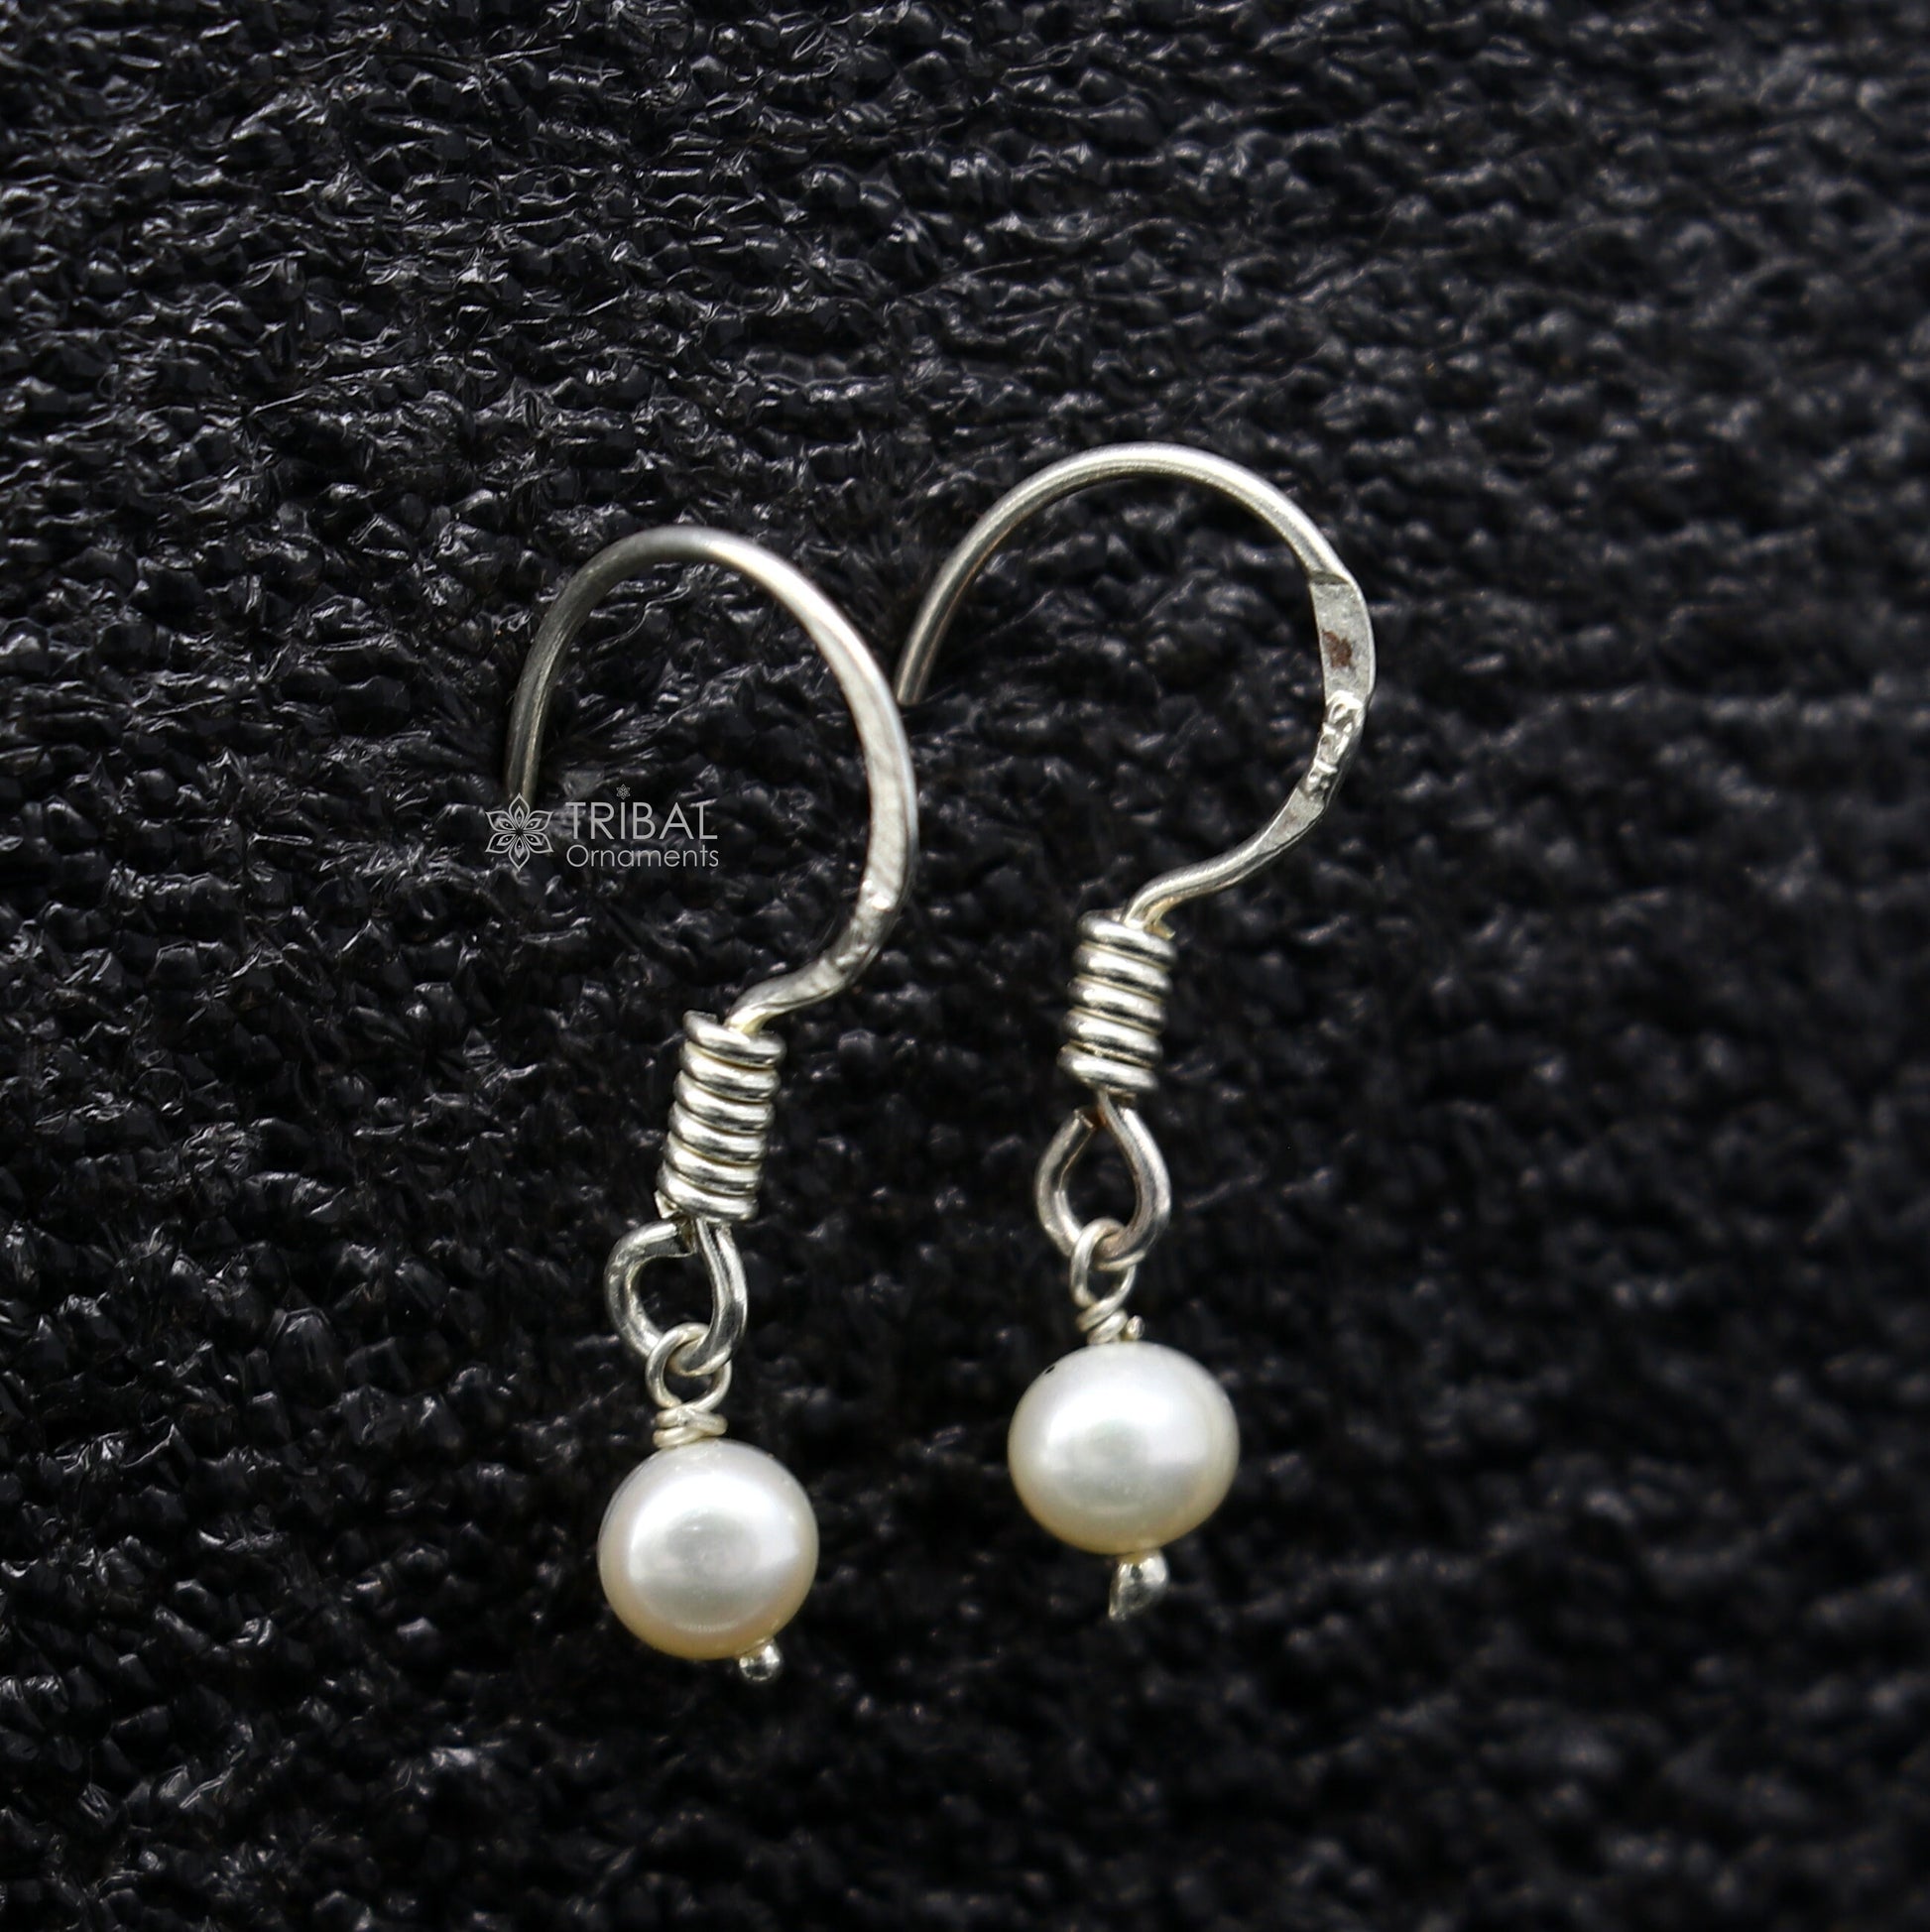 Unique 925 Sterling silver handmade fabulous Hoops earrings with gorgeous pearls stone stylish light weight delicate jewelry  s1209 - TRIBAL ORNAMENTS